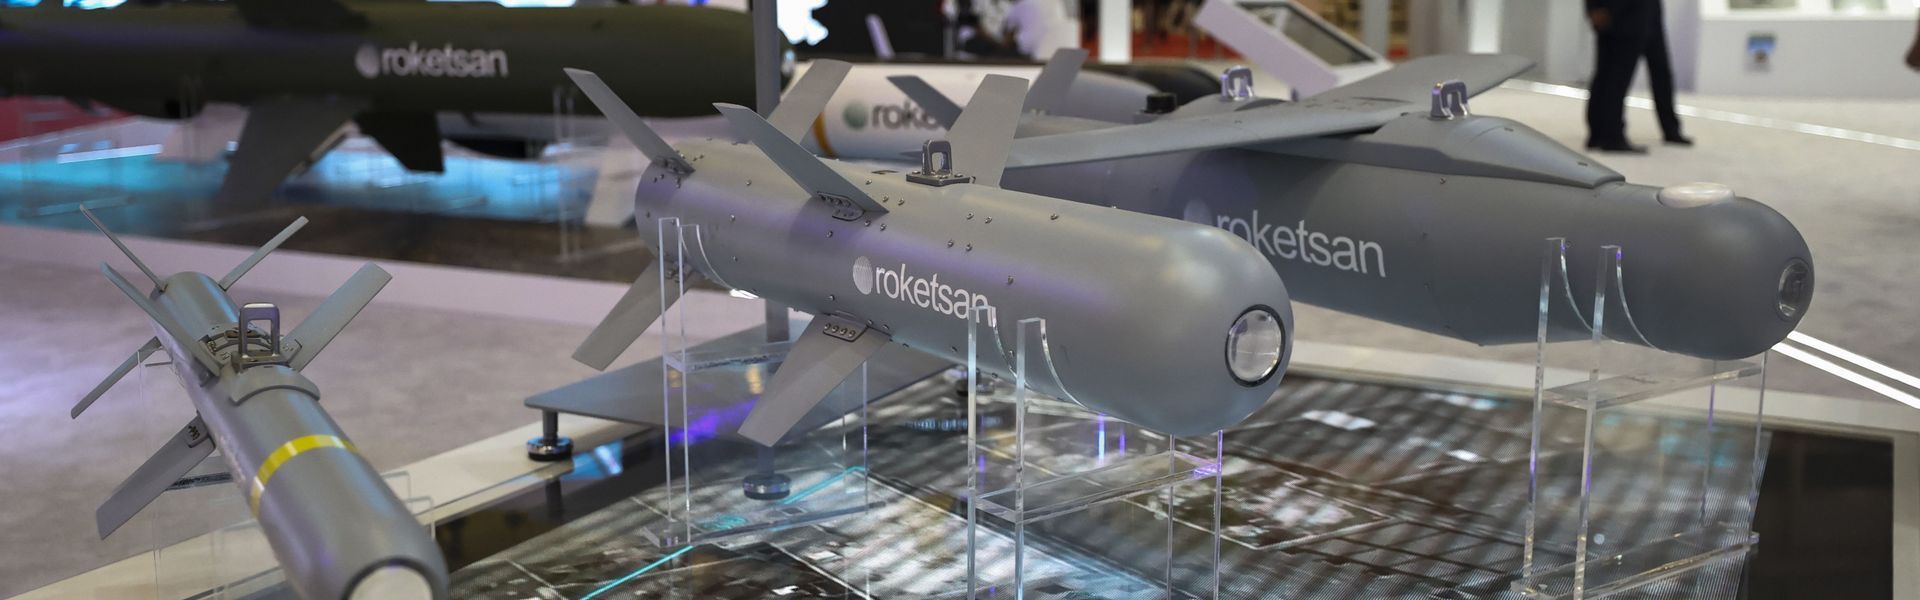 Air defence munitions of Roketsan are on display at the International Defence Industry Fair (IDEF) 2021 in Istanbul, Turkey.